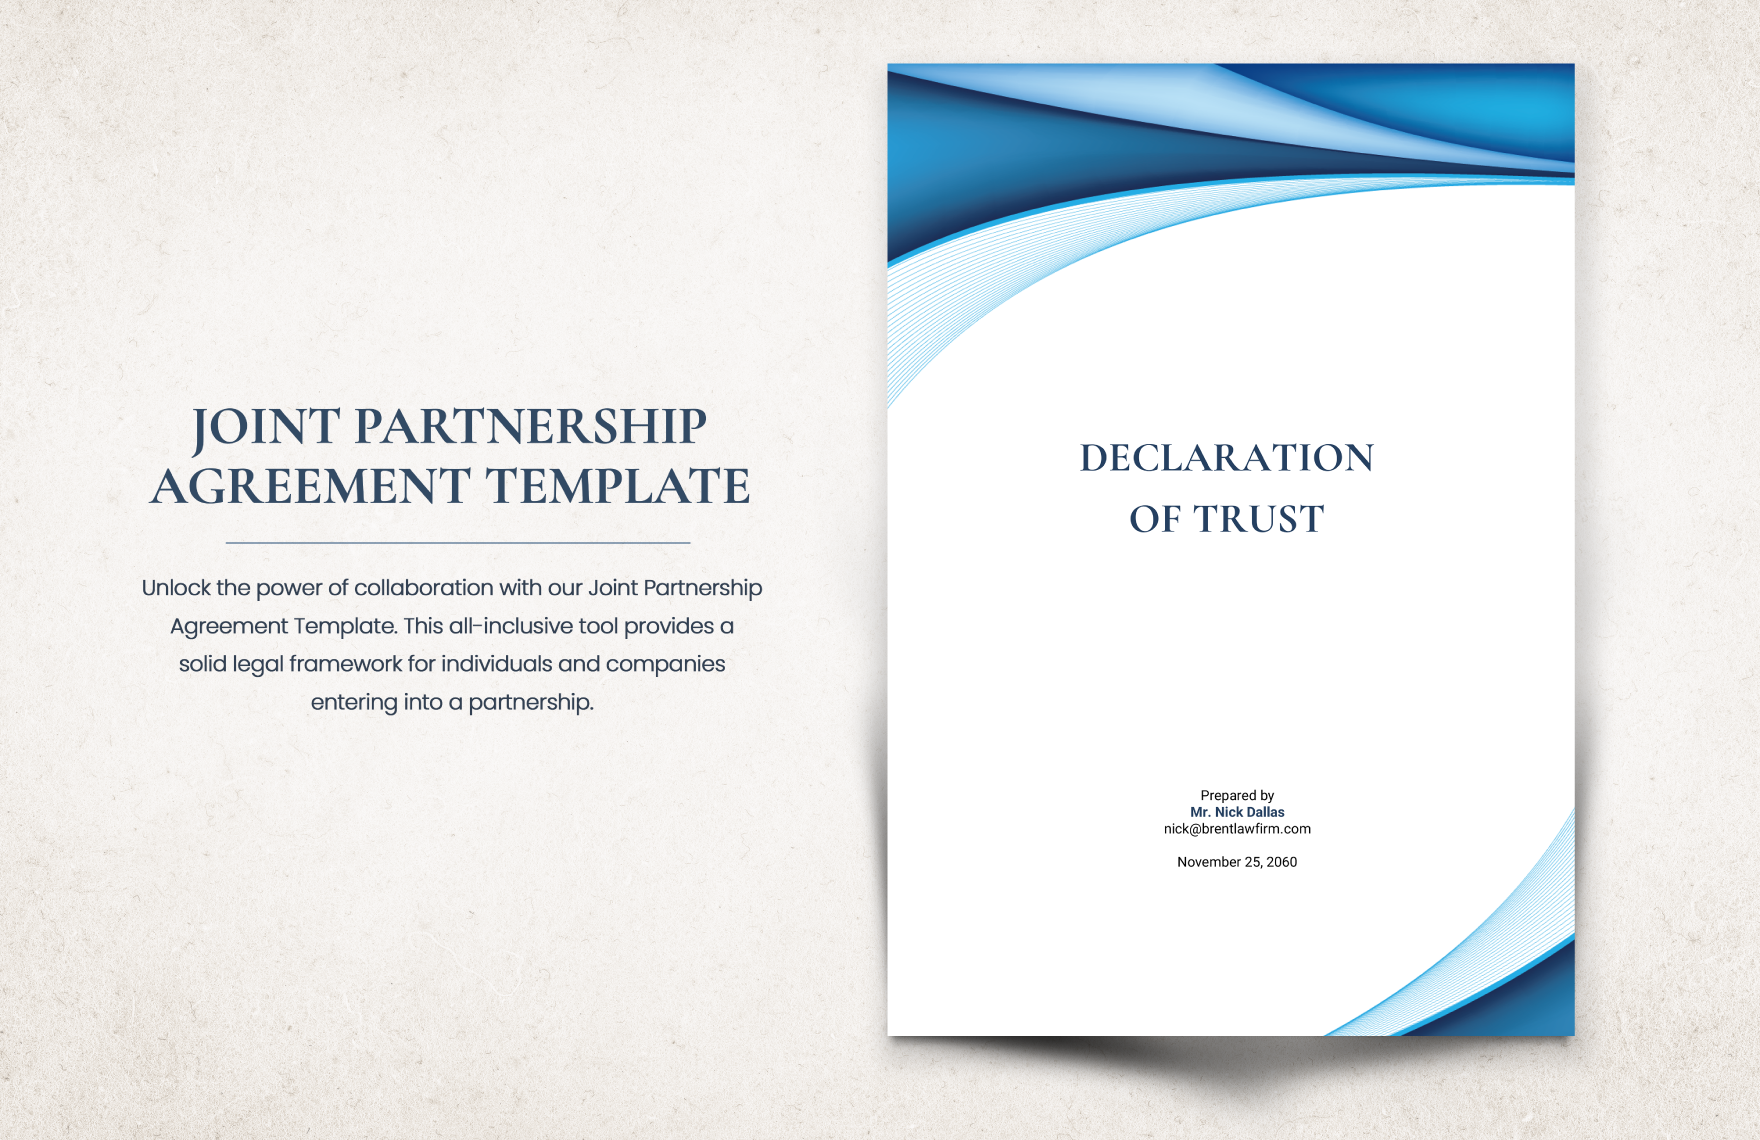 Joint Partnership Agreement Template